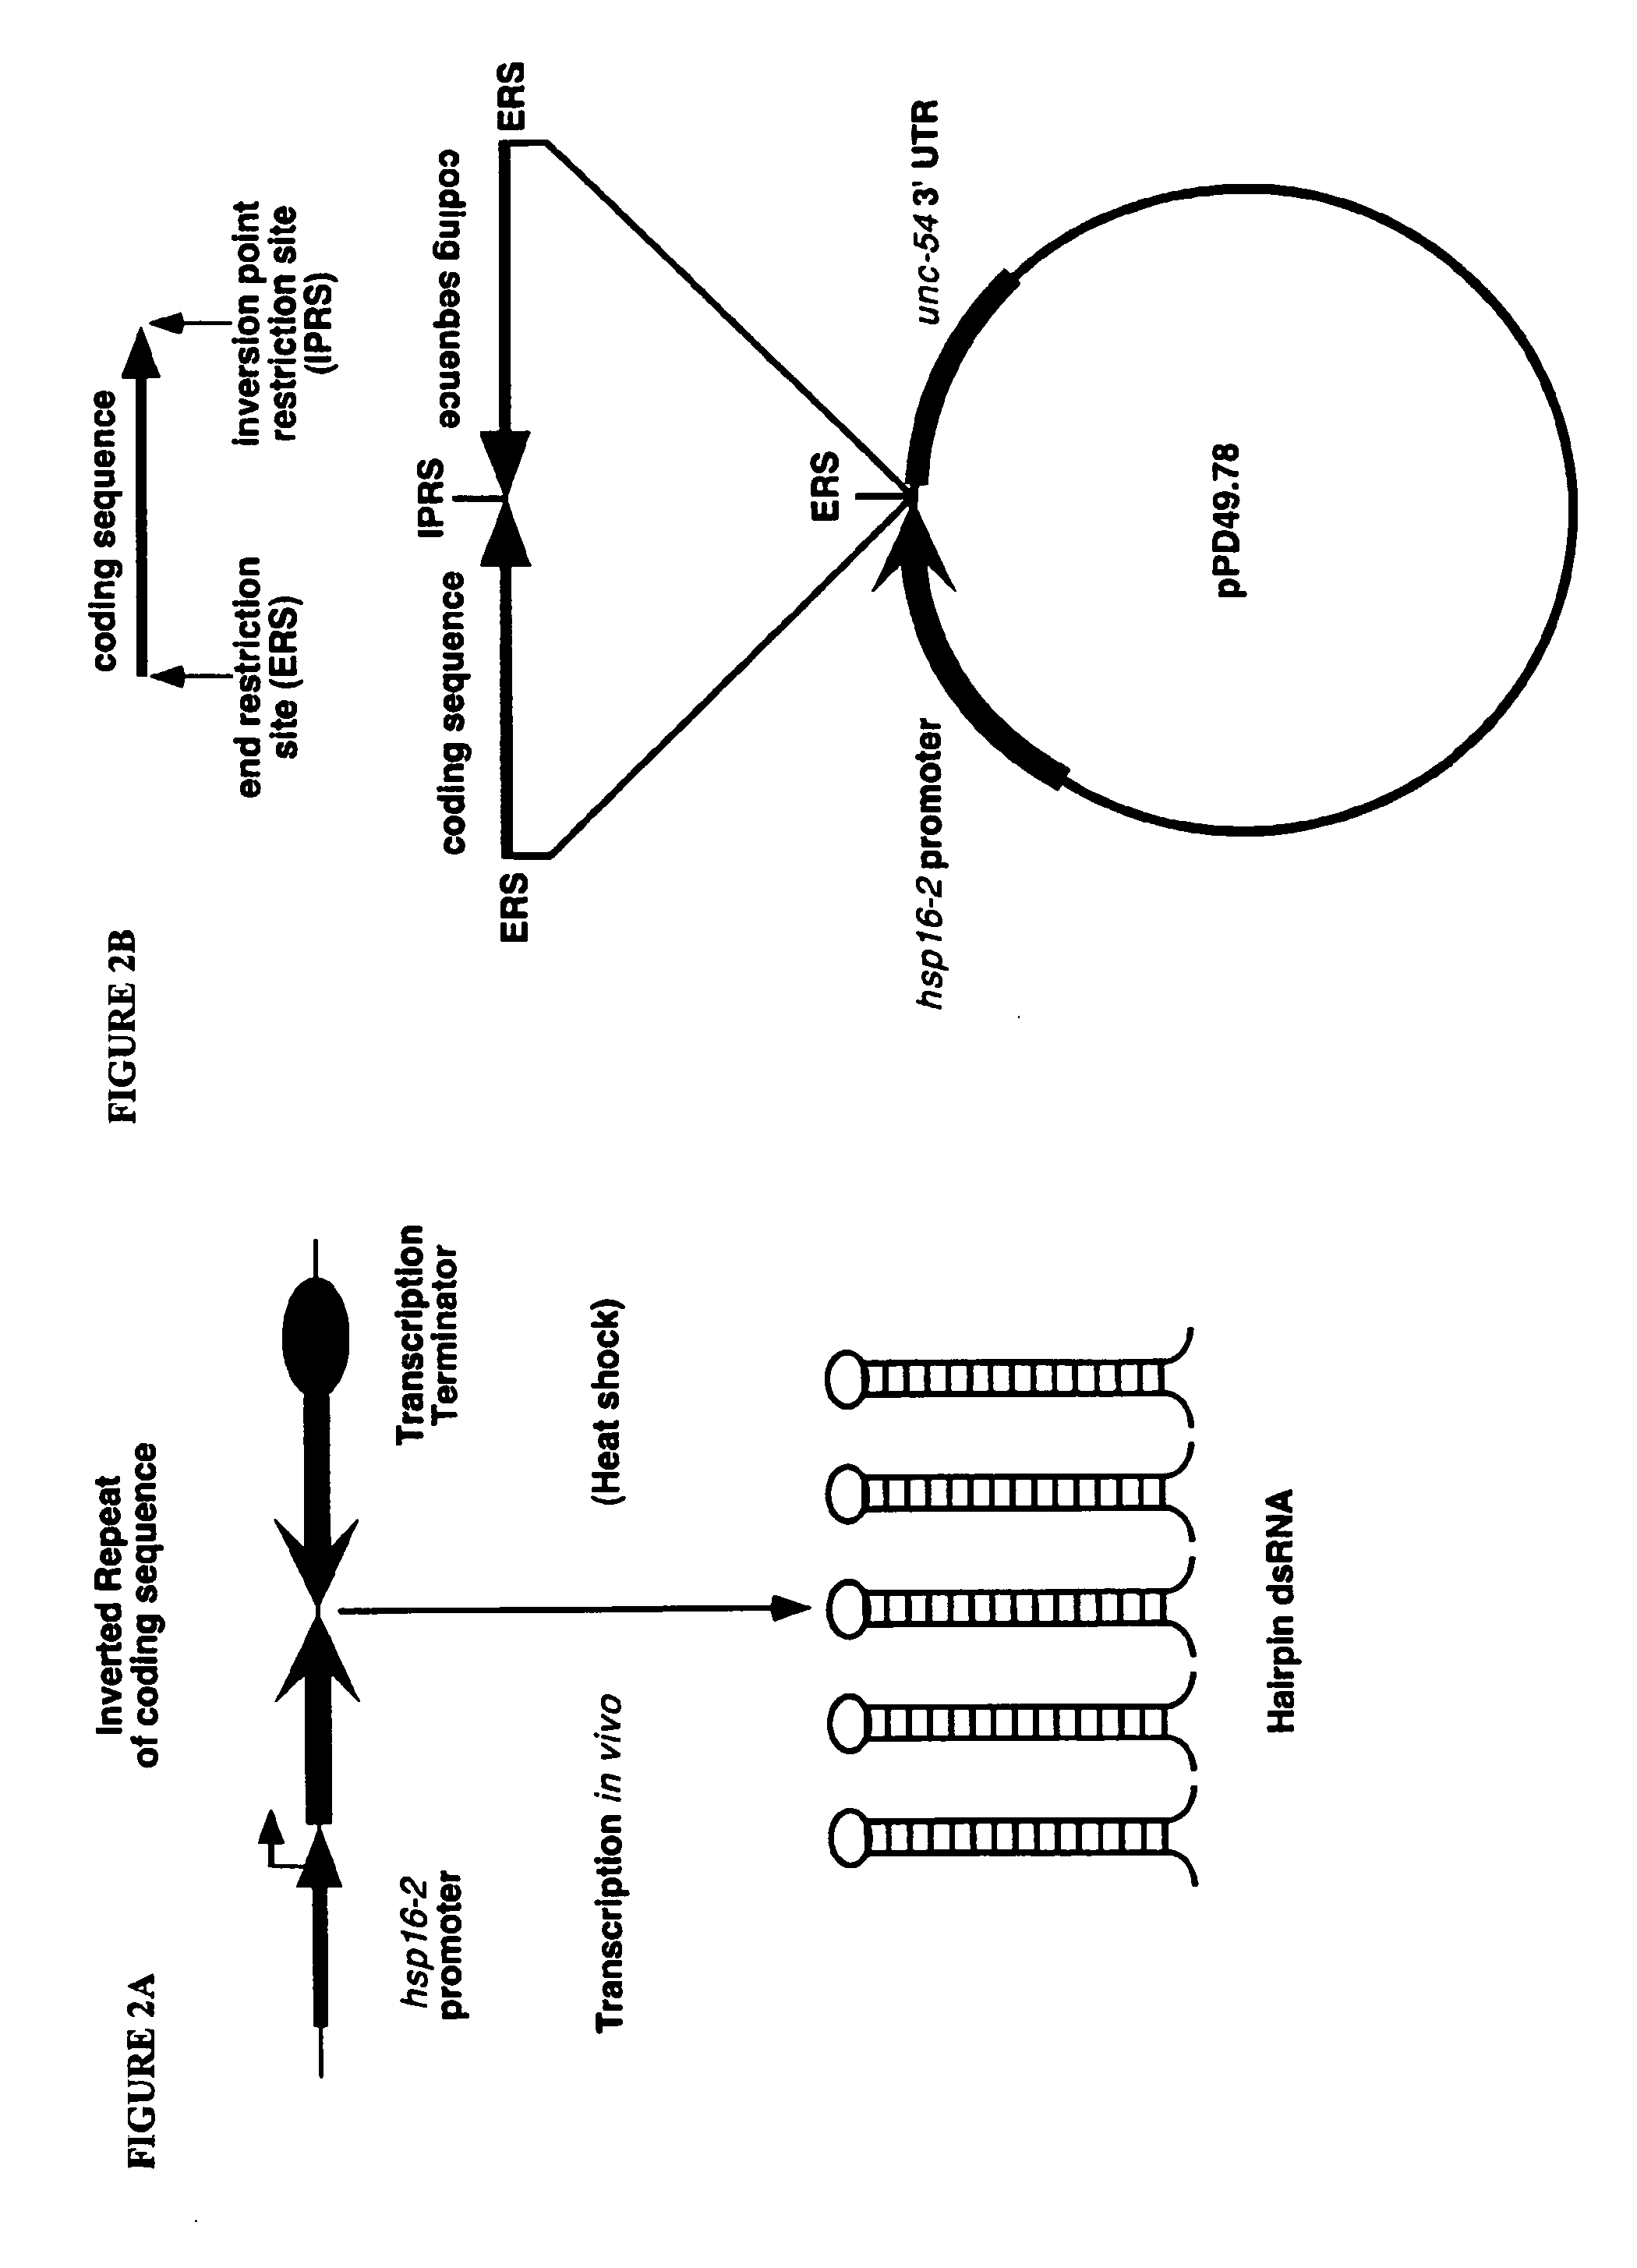 Compositions and methods for gene silencing